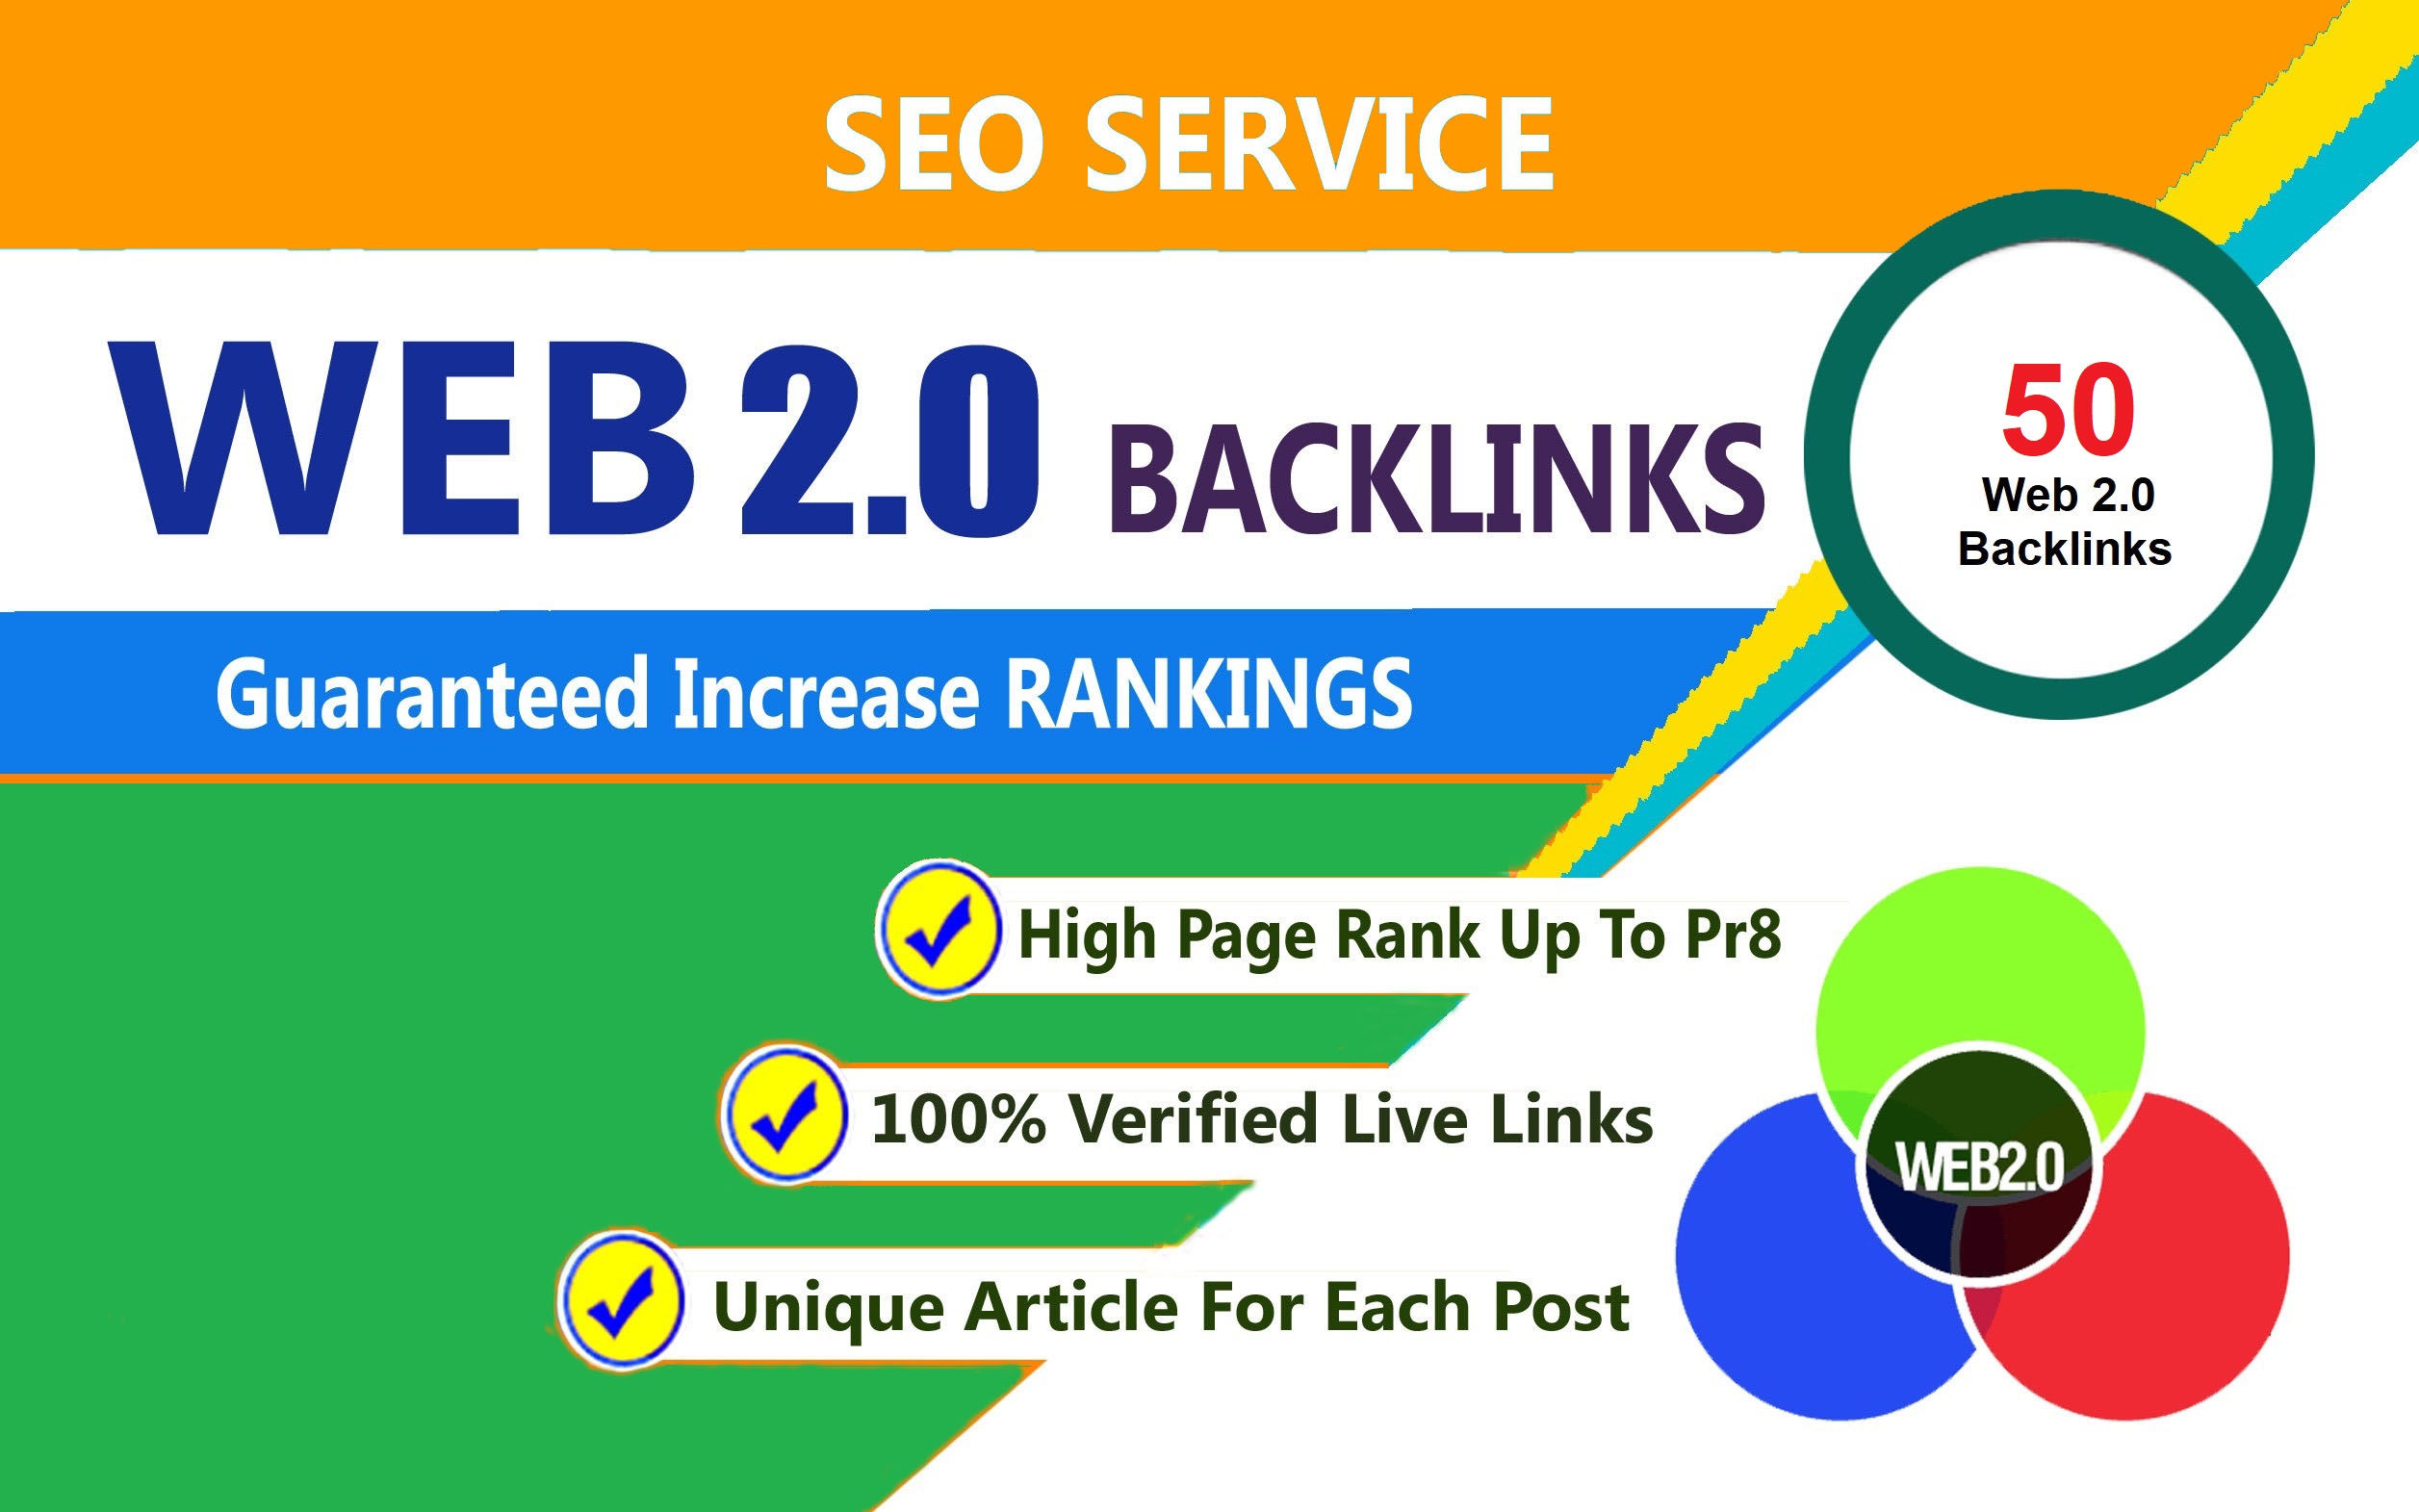 Get 100 Web 2.0 Contextual Backlinks, Buy Dofollow Links in Web 2.0 Blog Sites for $20